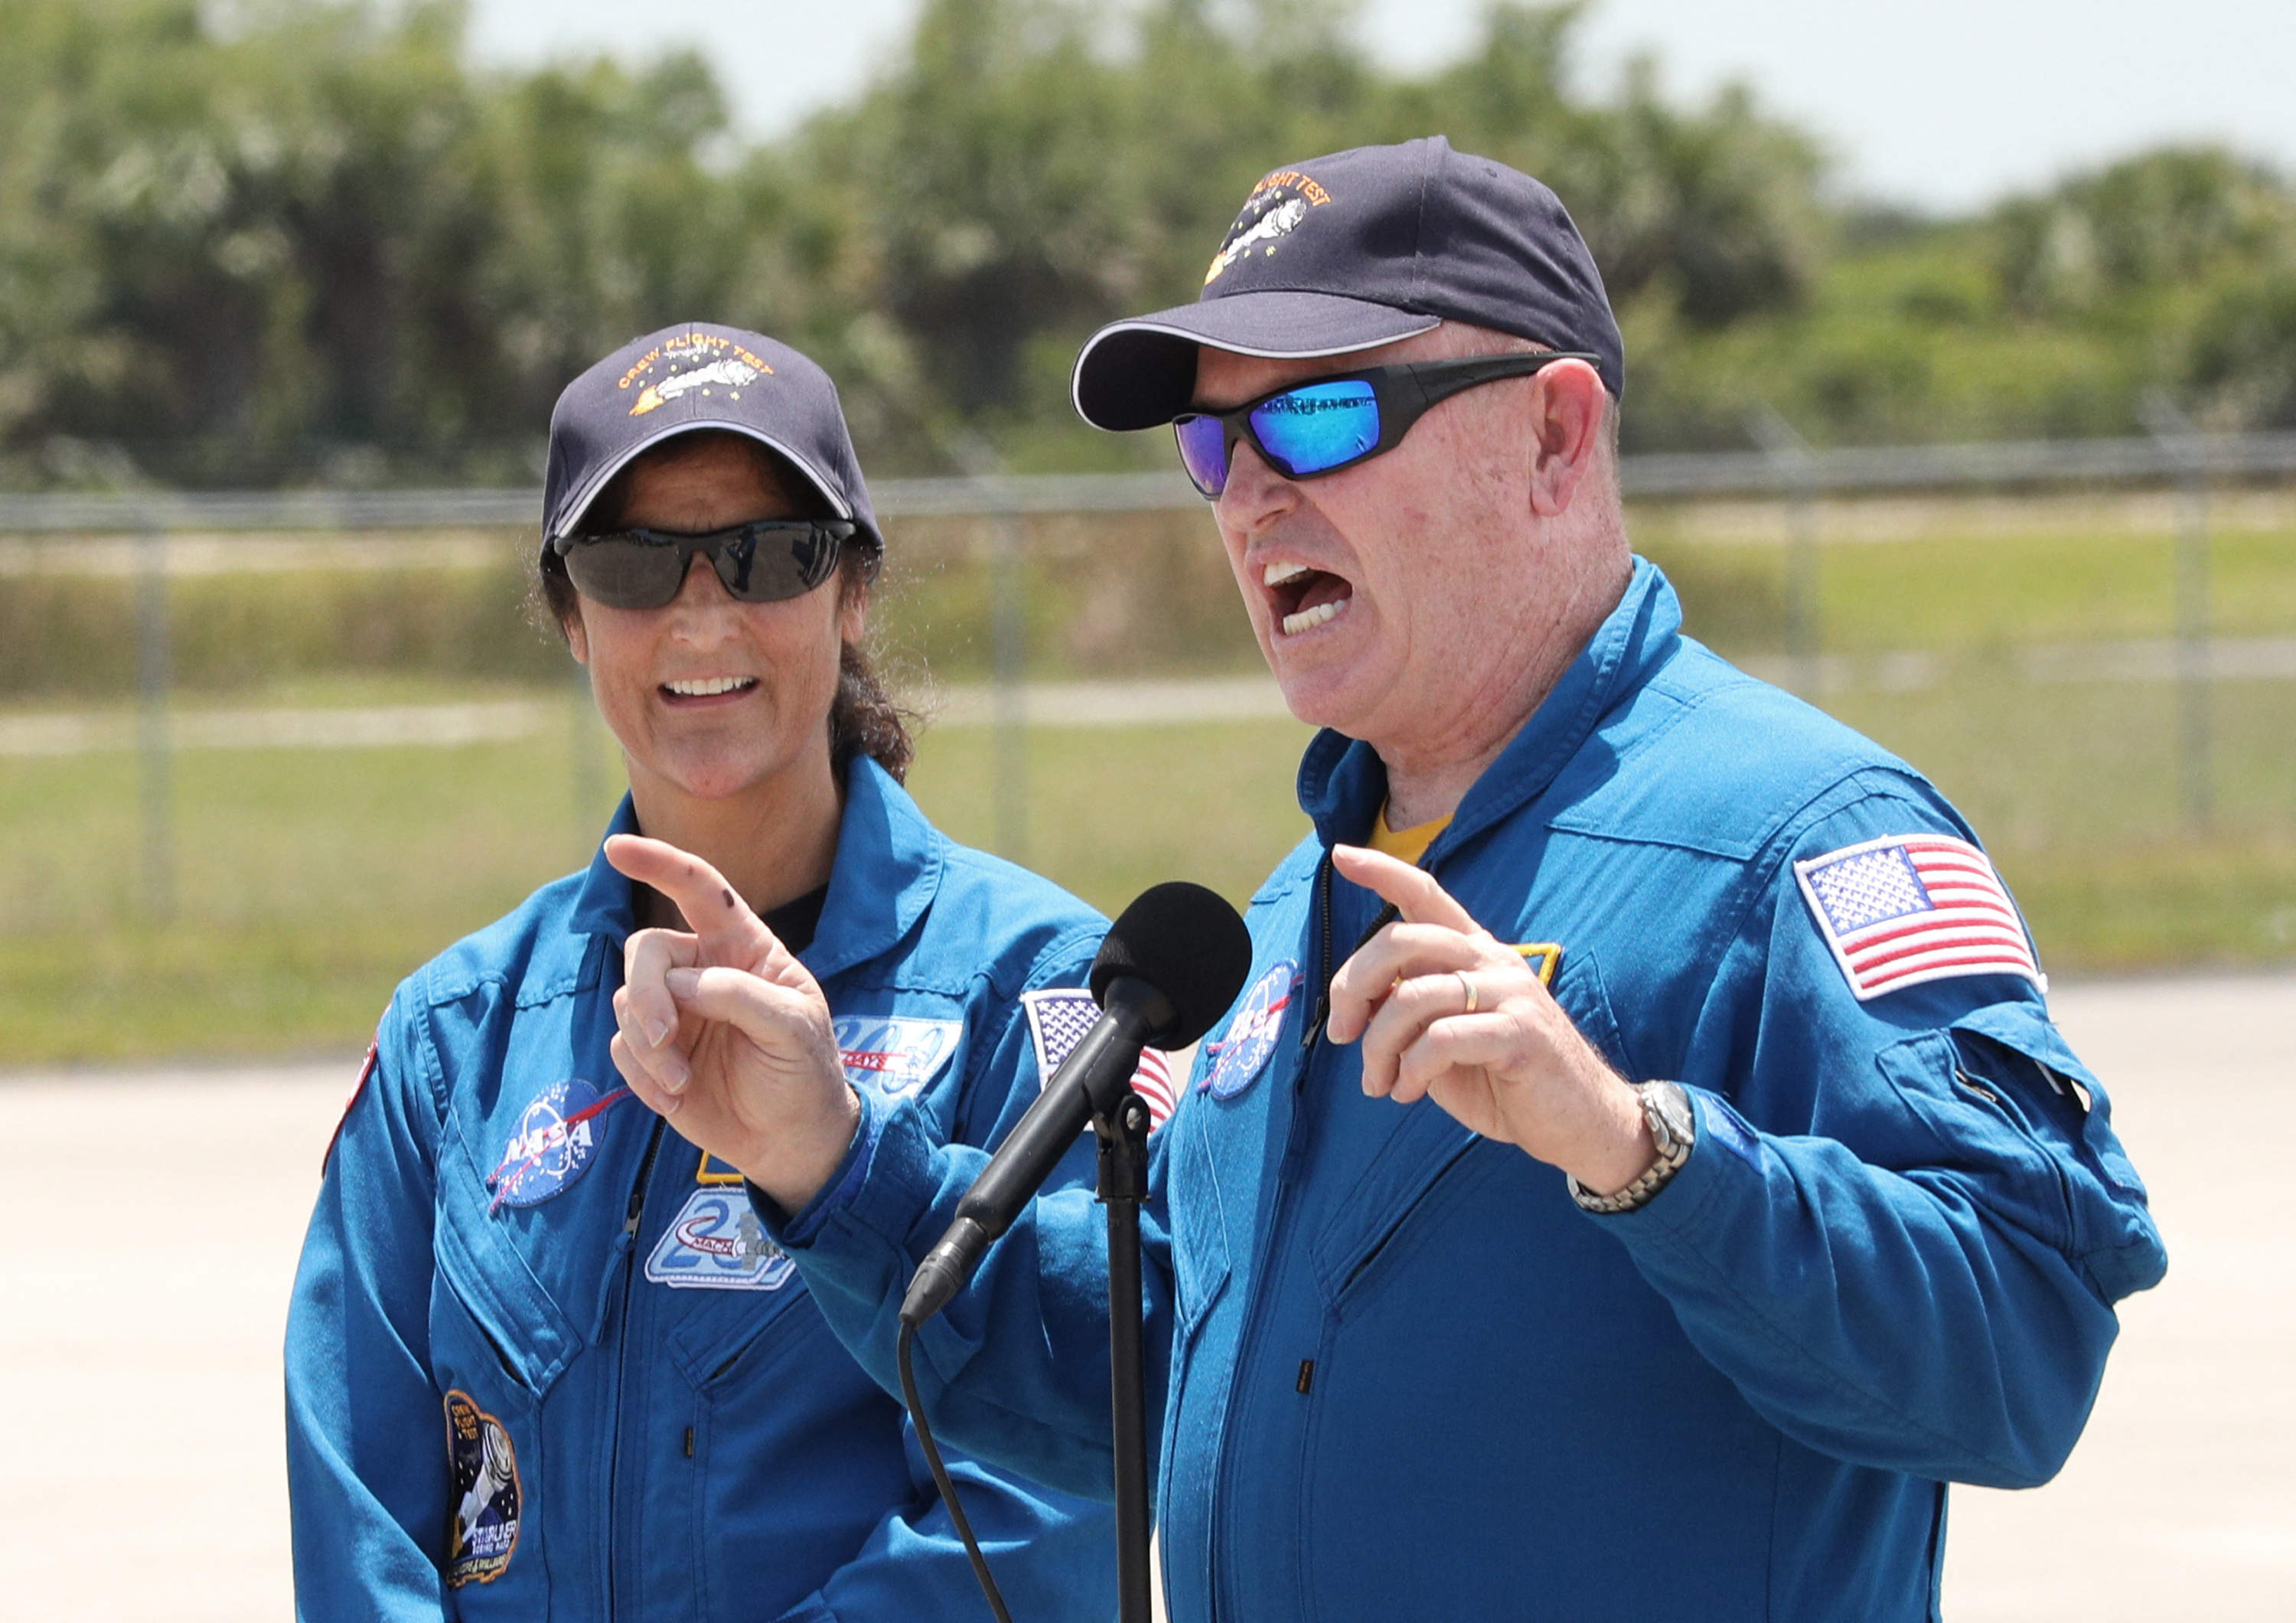 <p>NASA astronauts Butch Wilmore and Suni Williams spoke to the media at the Kennedy Space Center in Cape Canaveral, Florida, on April 25, 2024, after arriving via T-38 jets.</p><p>The pair will fly on the Crew Flight Test-1 (CFT-1) mission to the International Space Station, set for May 6, 2024.</p><p>A United Launch Alliance (ULA) Atlas V rocket will ferry the Boeing CST-100 Starliner capsule on its historic first crewed flight of the new spacecraft.</p><p>Wilmore and Williams will also be the first humans launched into space aboard an Atlas V rocket.</p>